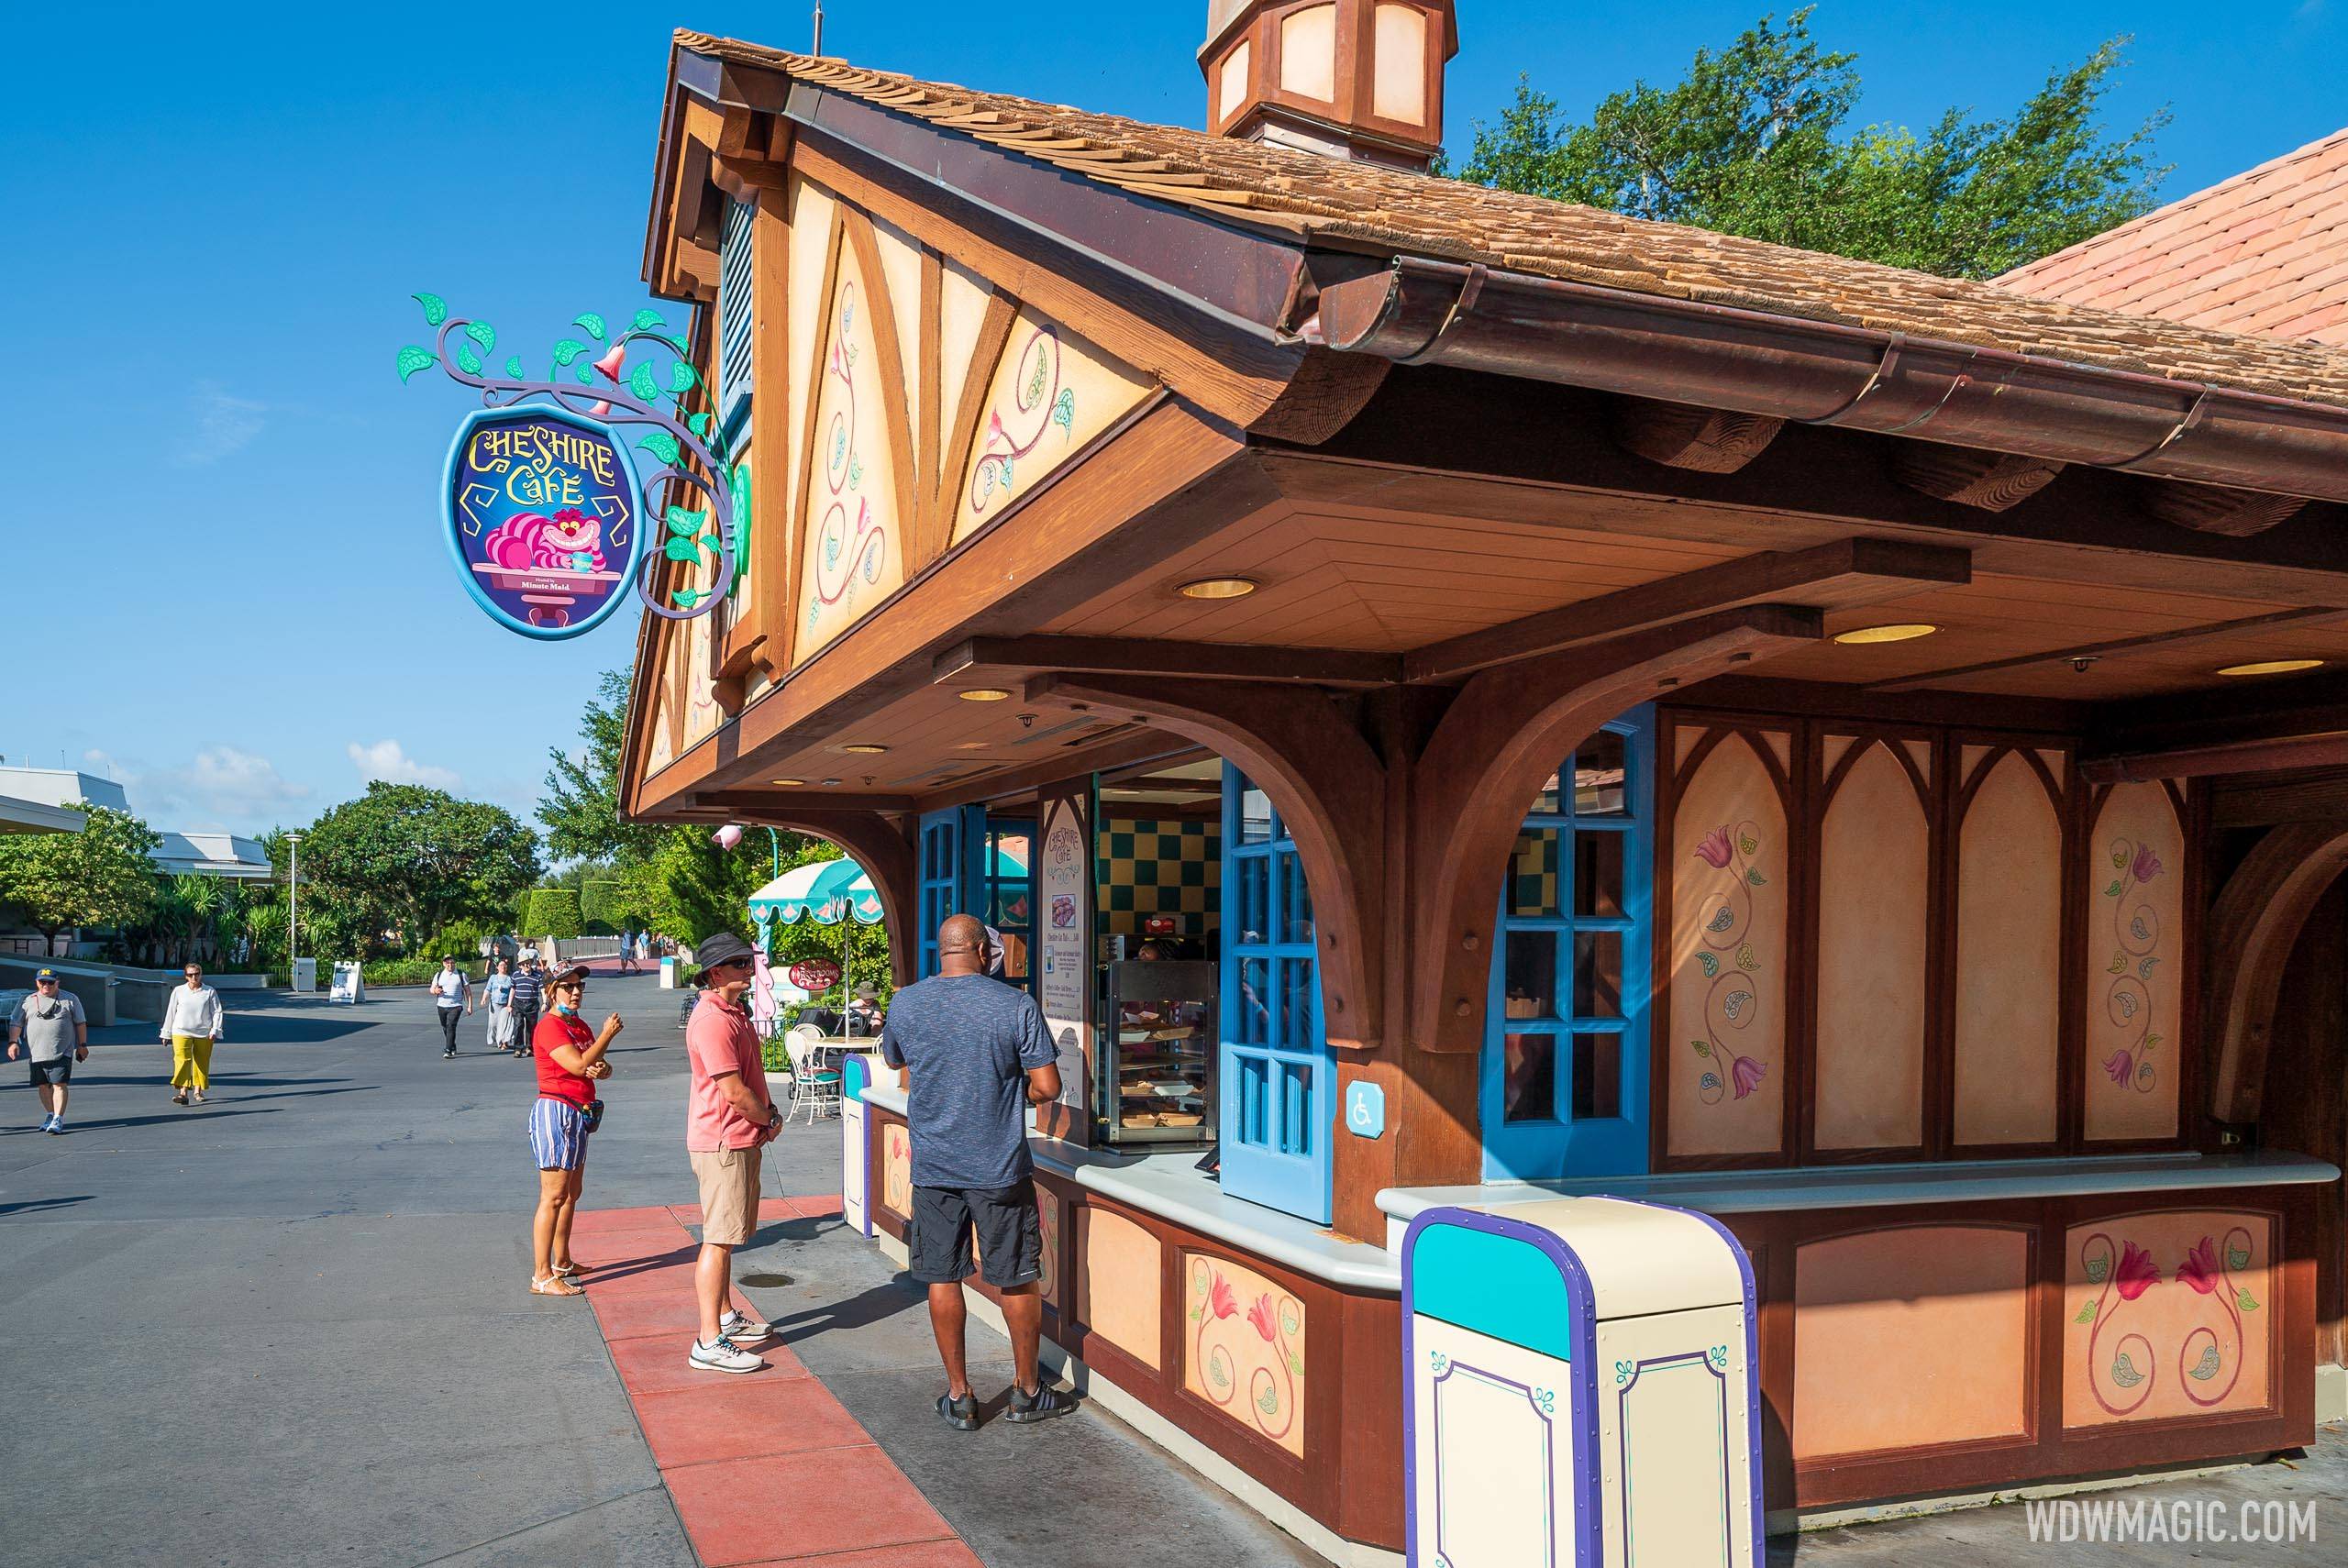 Cheshire Cafe and Prince Eric's Village Market have reopened at Magic Kingdom today